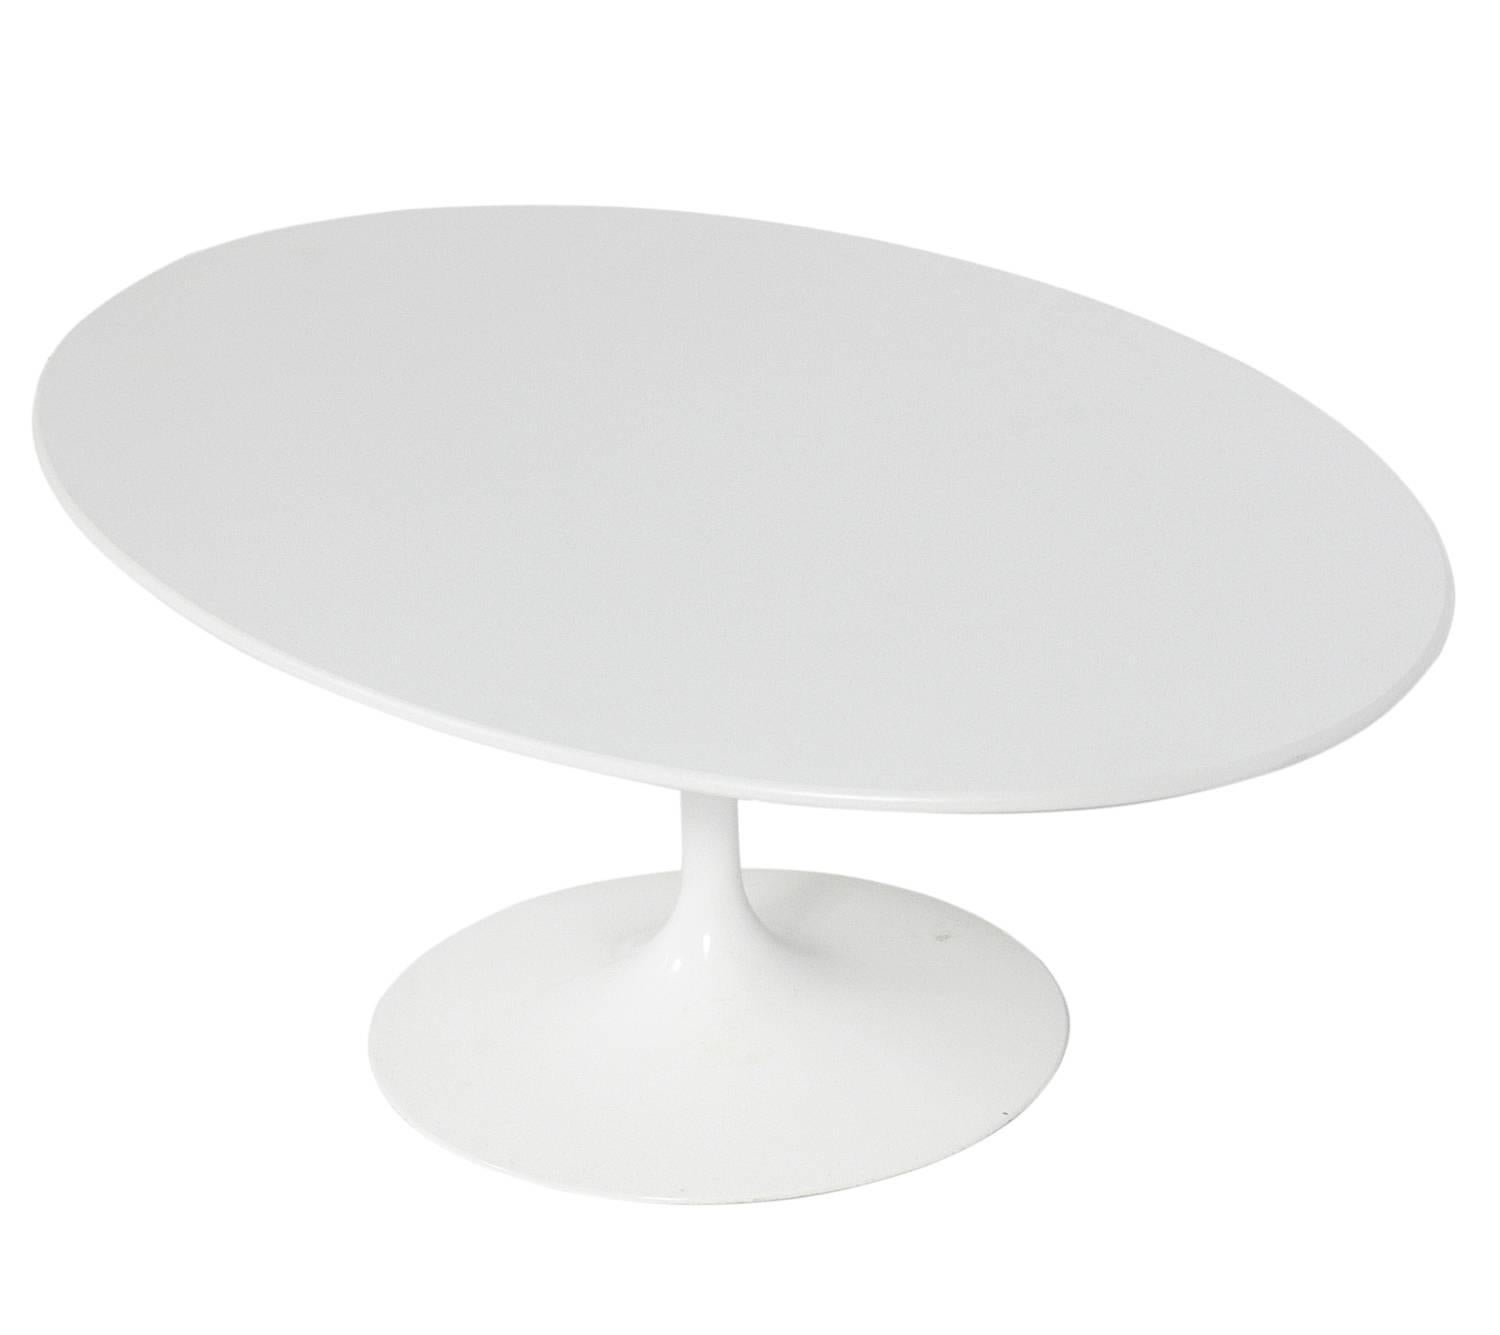 Oval Tulip coffee table, designed by Eero Saarinen for Knoll, Italian, originally designed in 1957, this example is circa 2000s production. It was purchased for the Art Basel show in Miami and was only used for the show. Marked with Knoll label